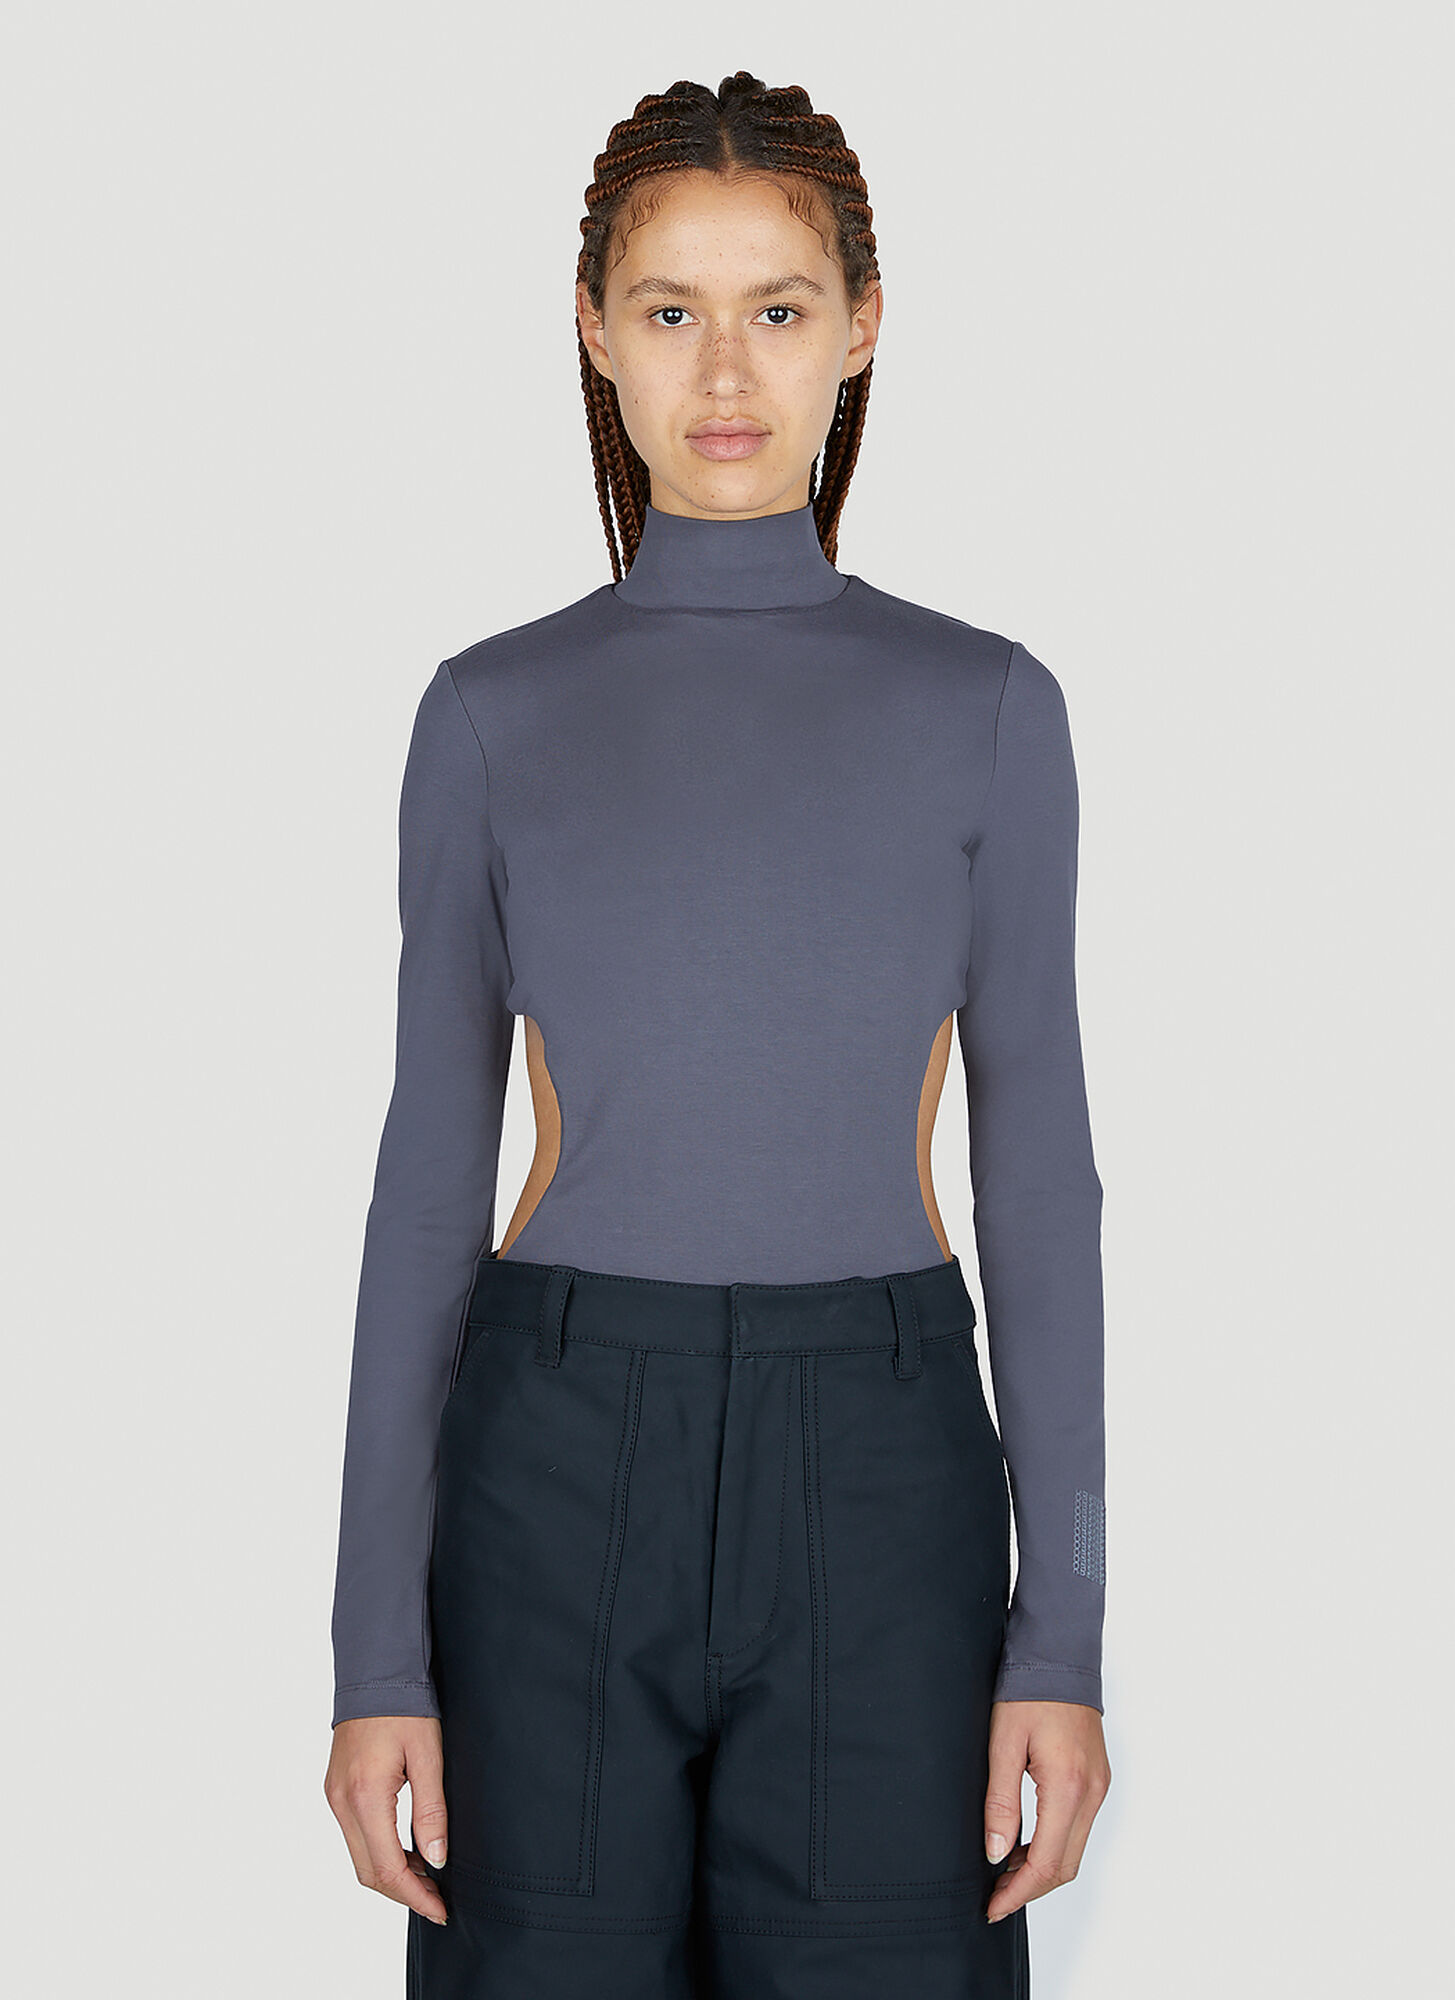 Marc Jacobs Cut Out Bodysuit In Grey